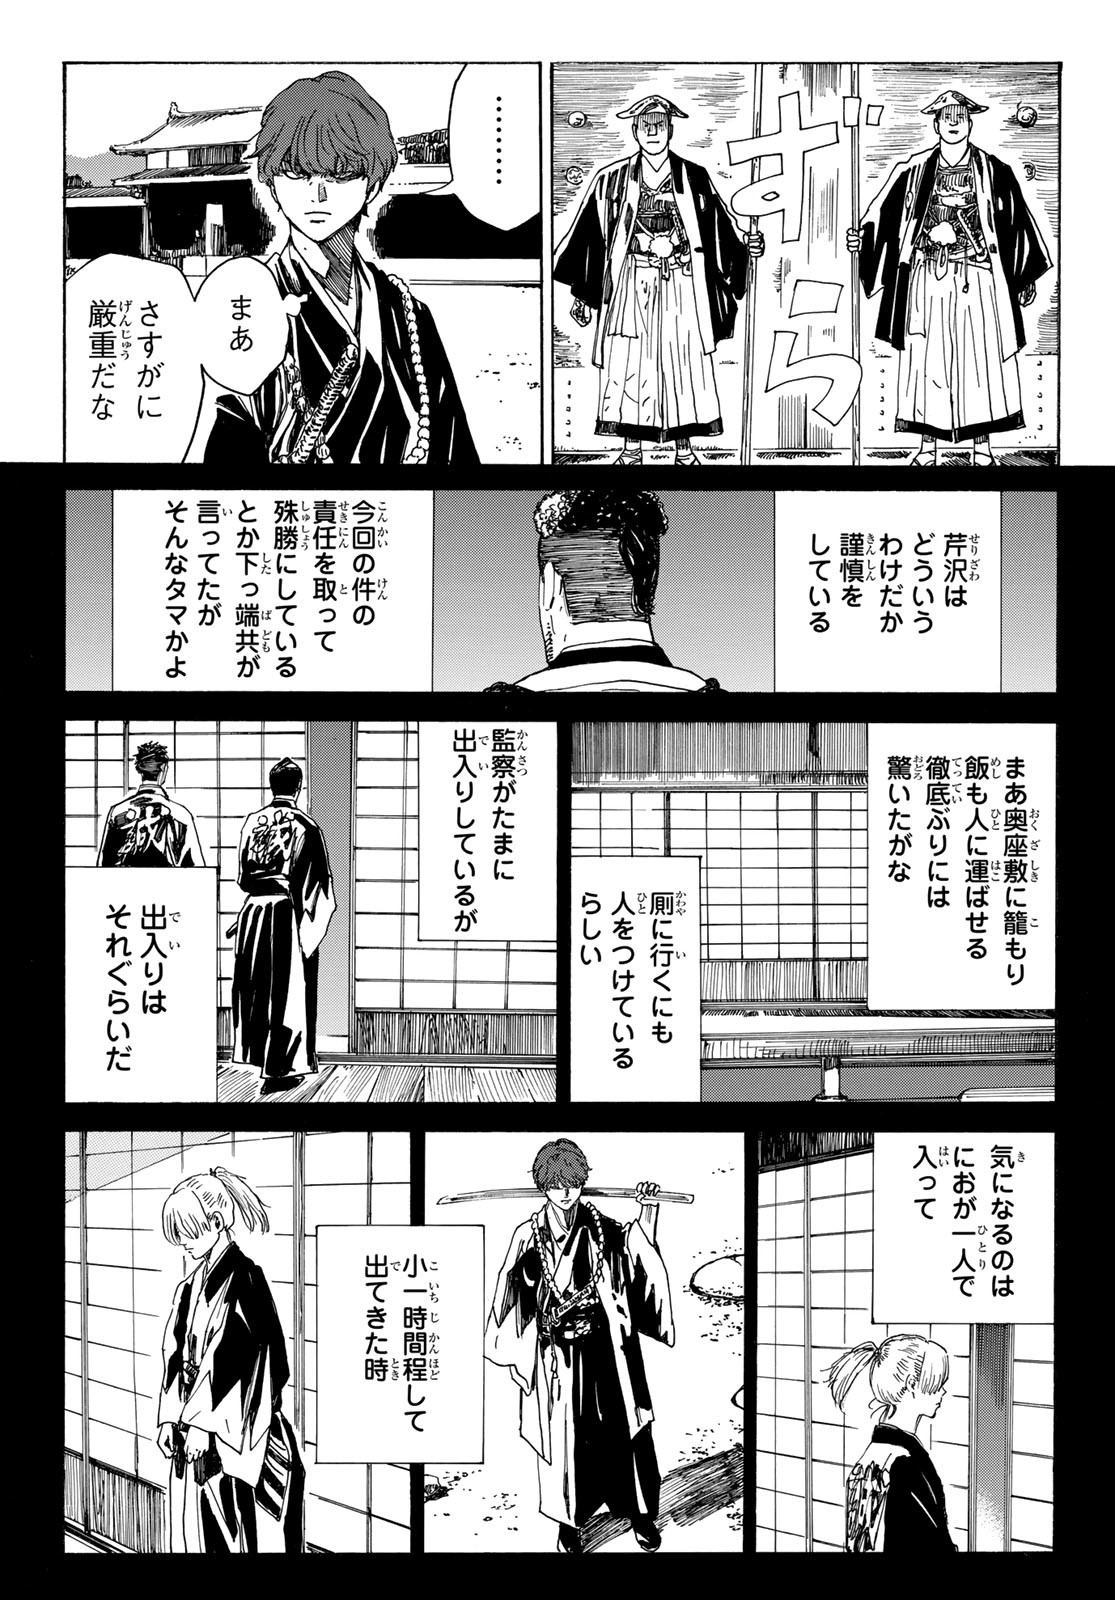 An Mo Miburo 第92話 - Page 3